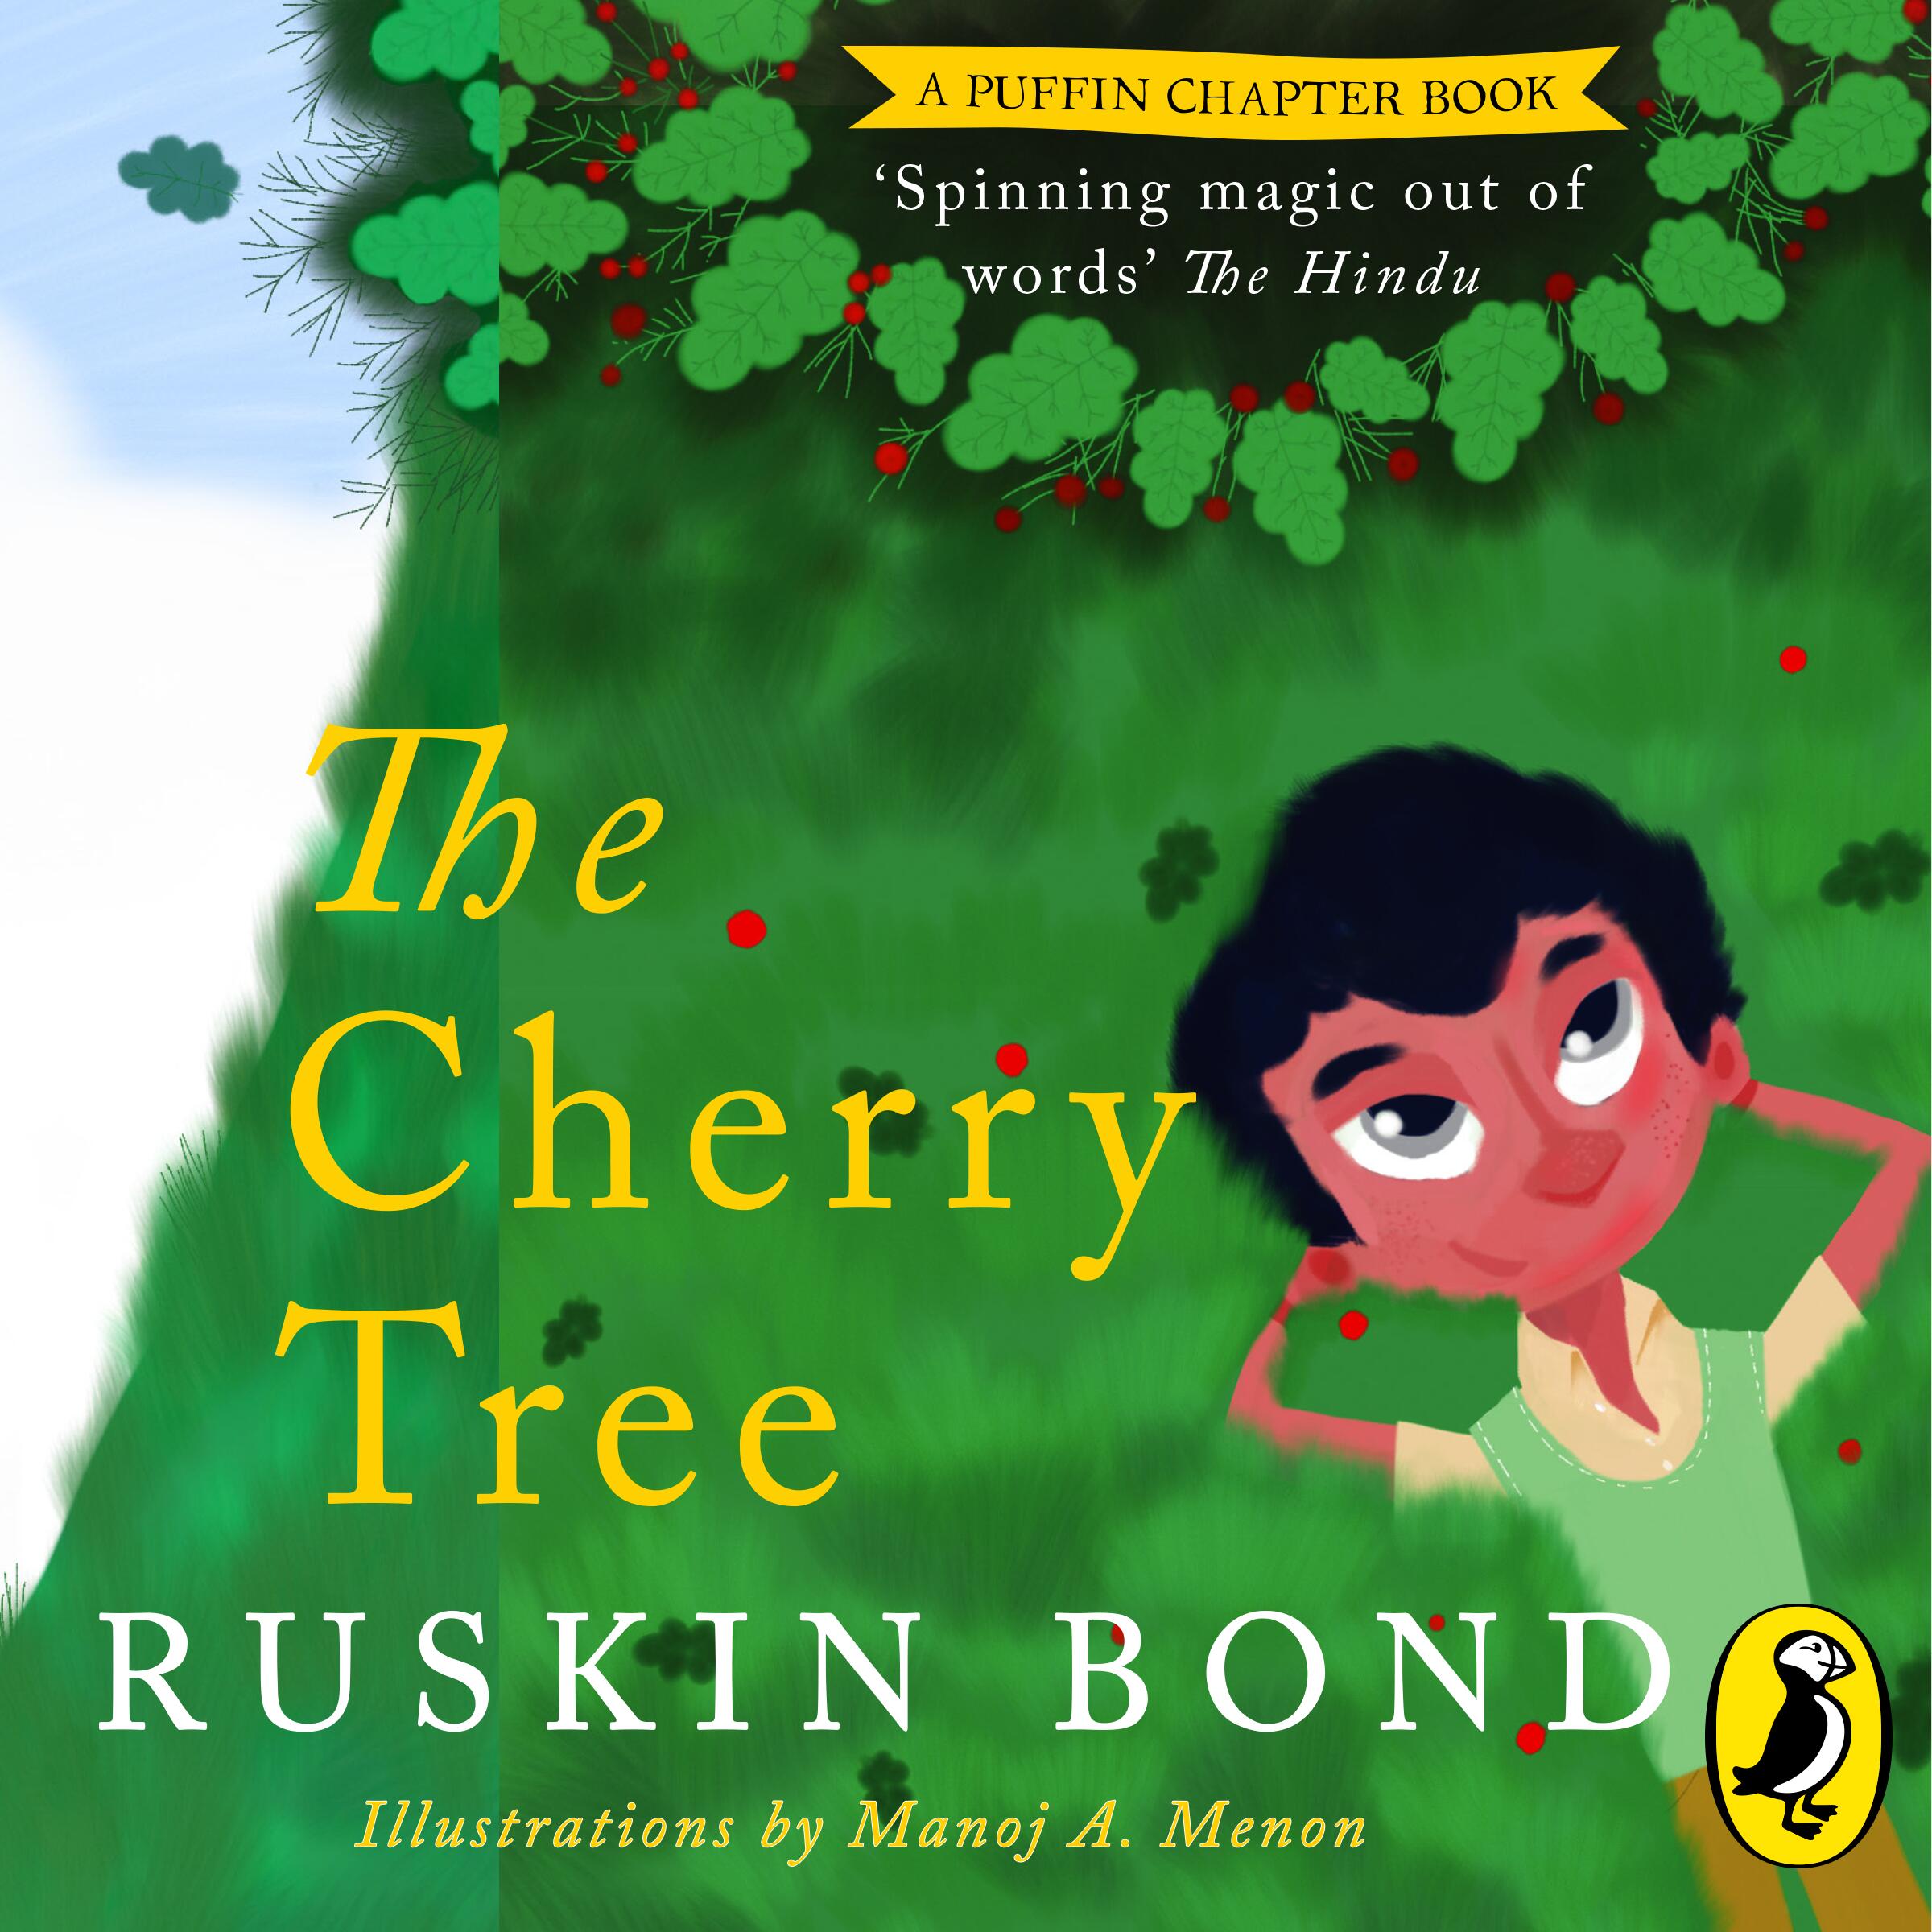 The View From the Cherry Tree by Willo Davis Roberts